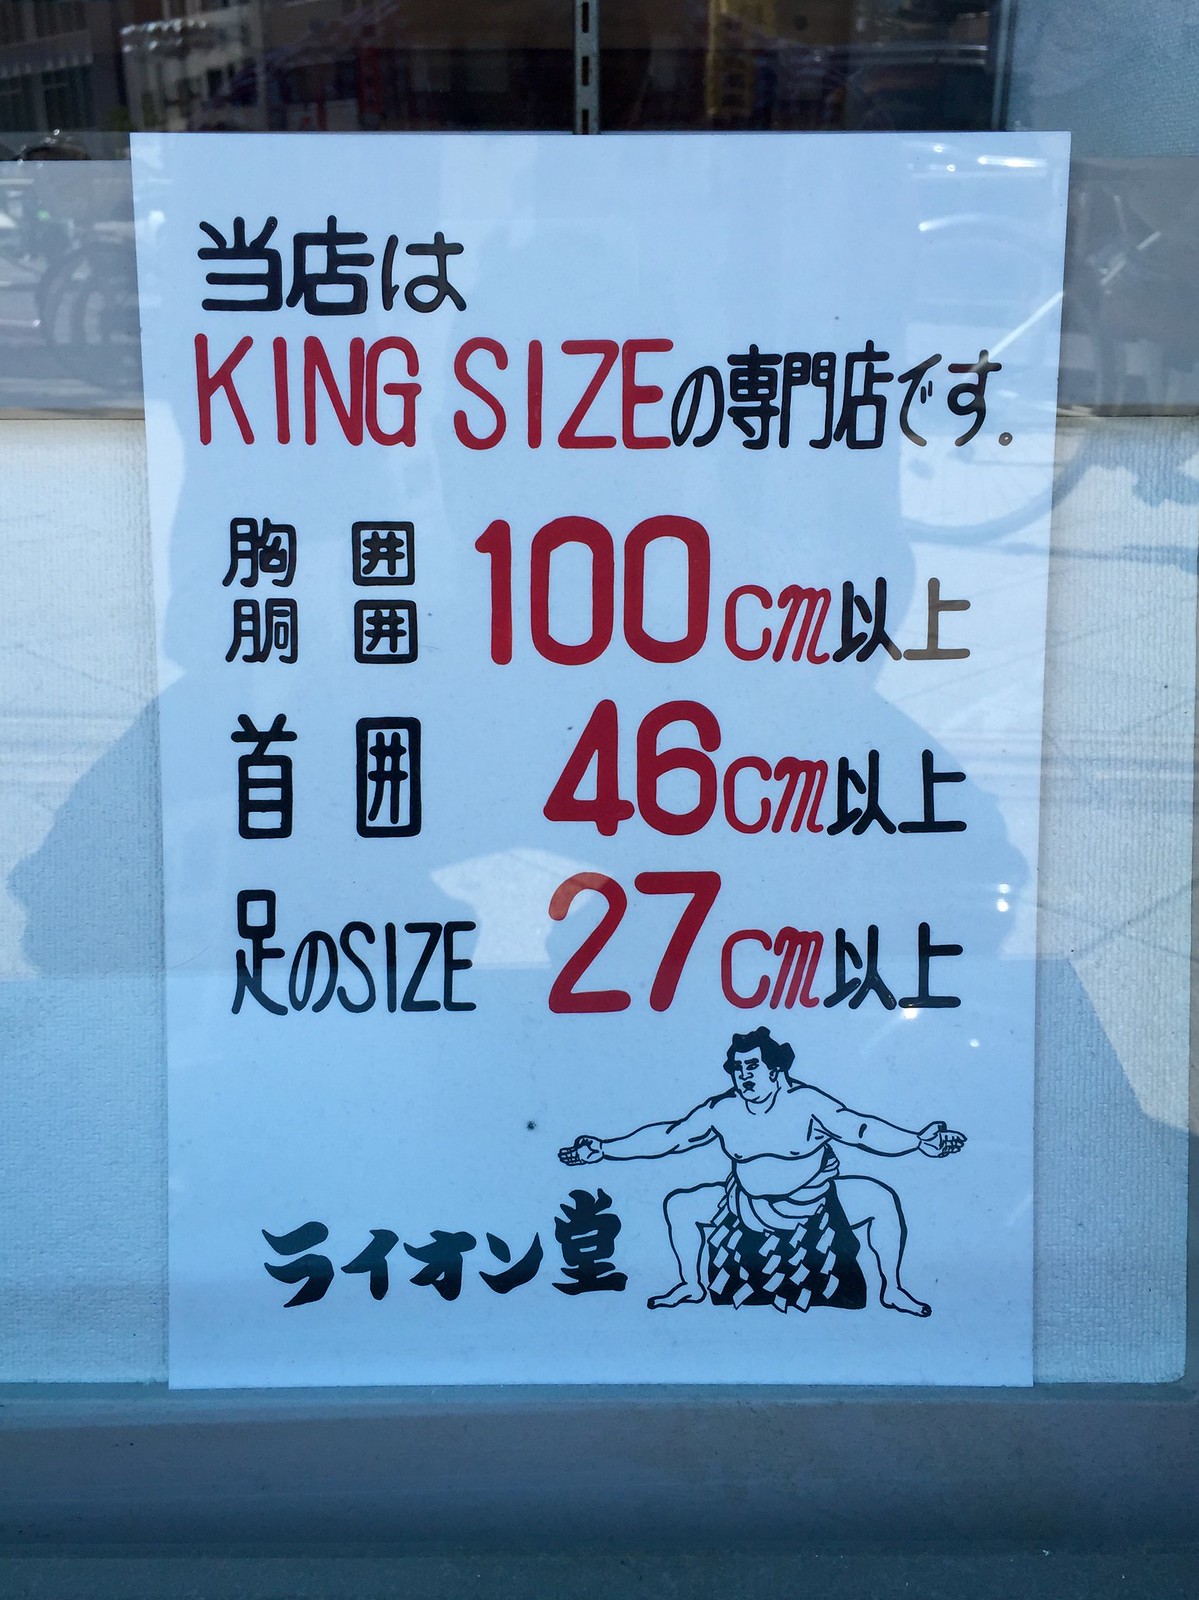 Lion-do, shop for Sumo size clothing at Ryogoku in Tokyo